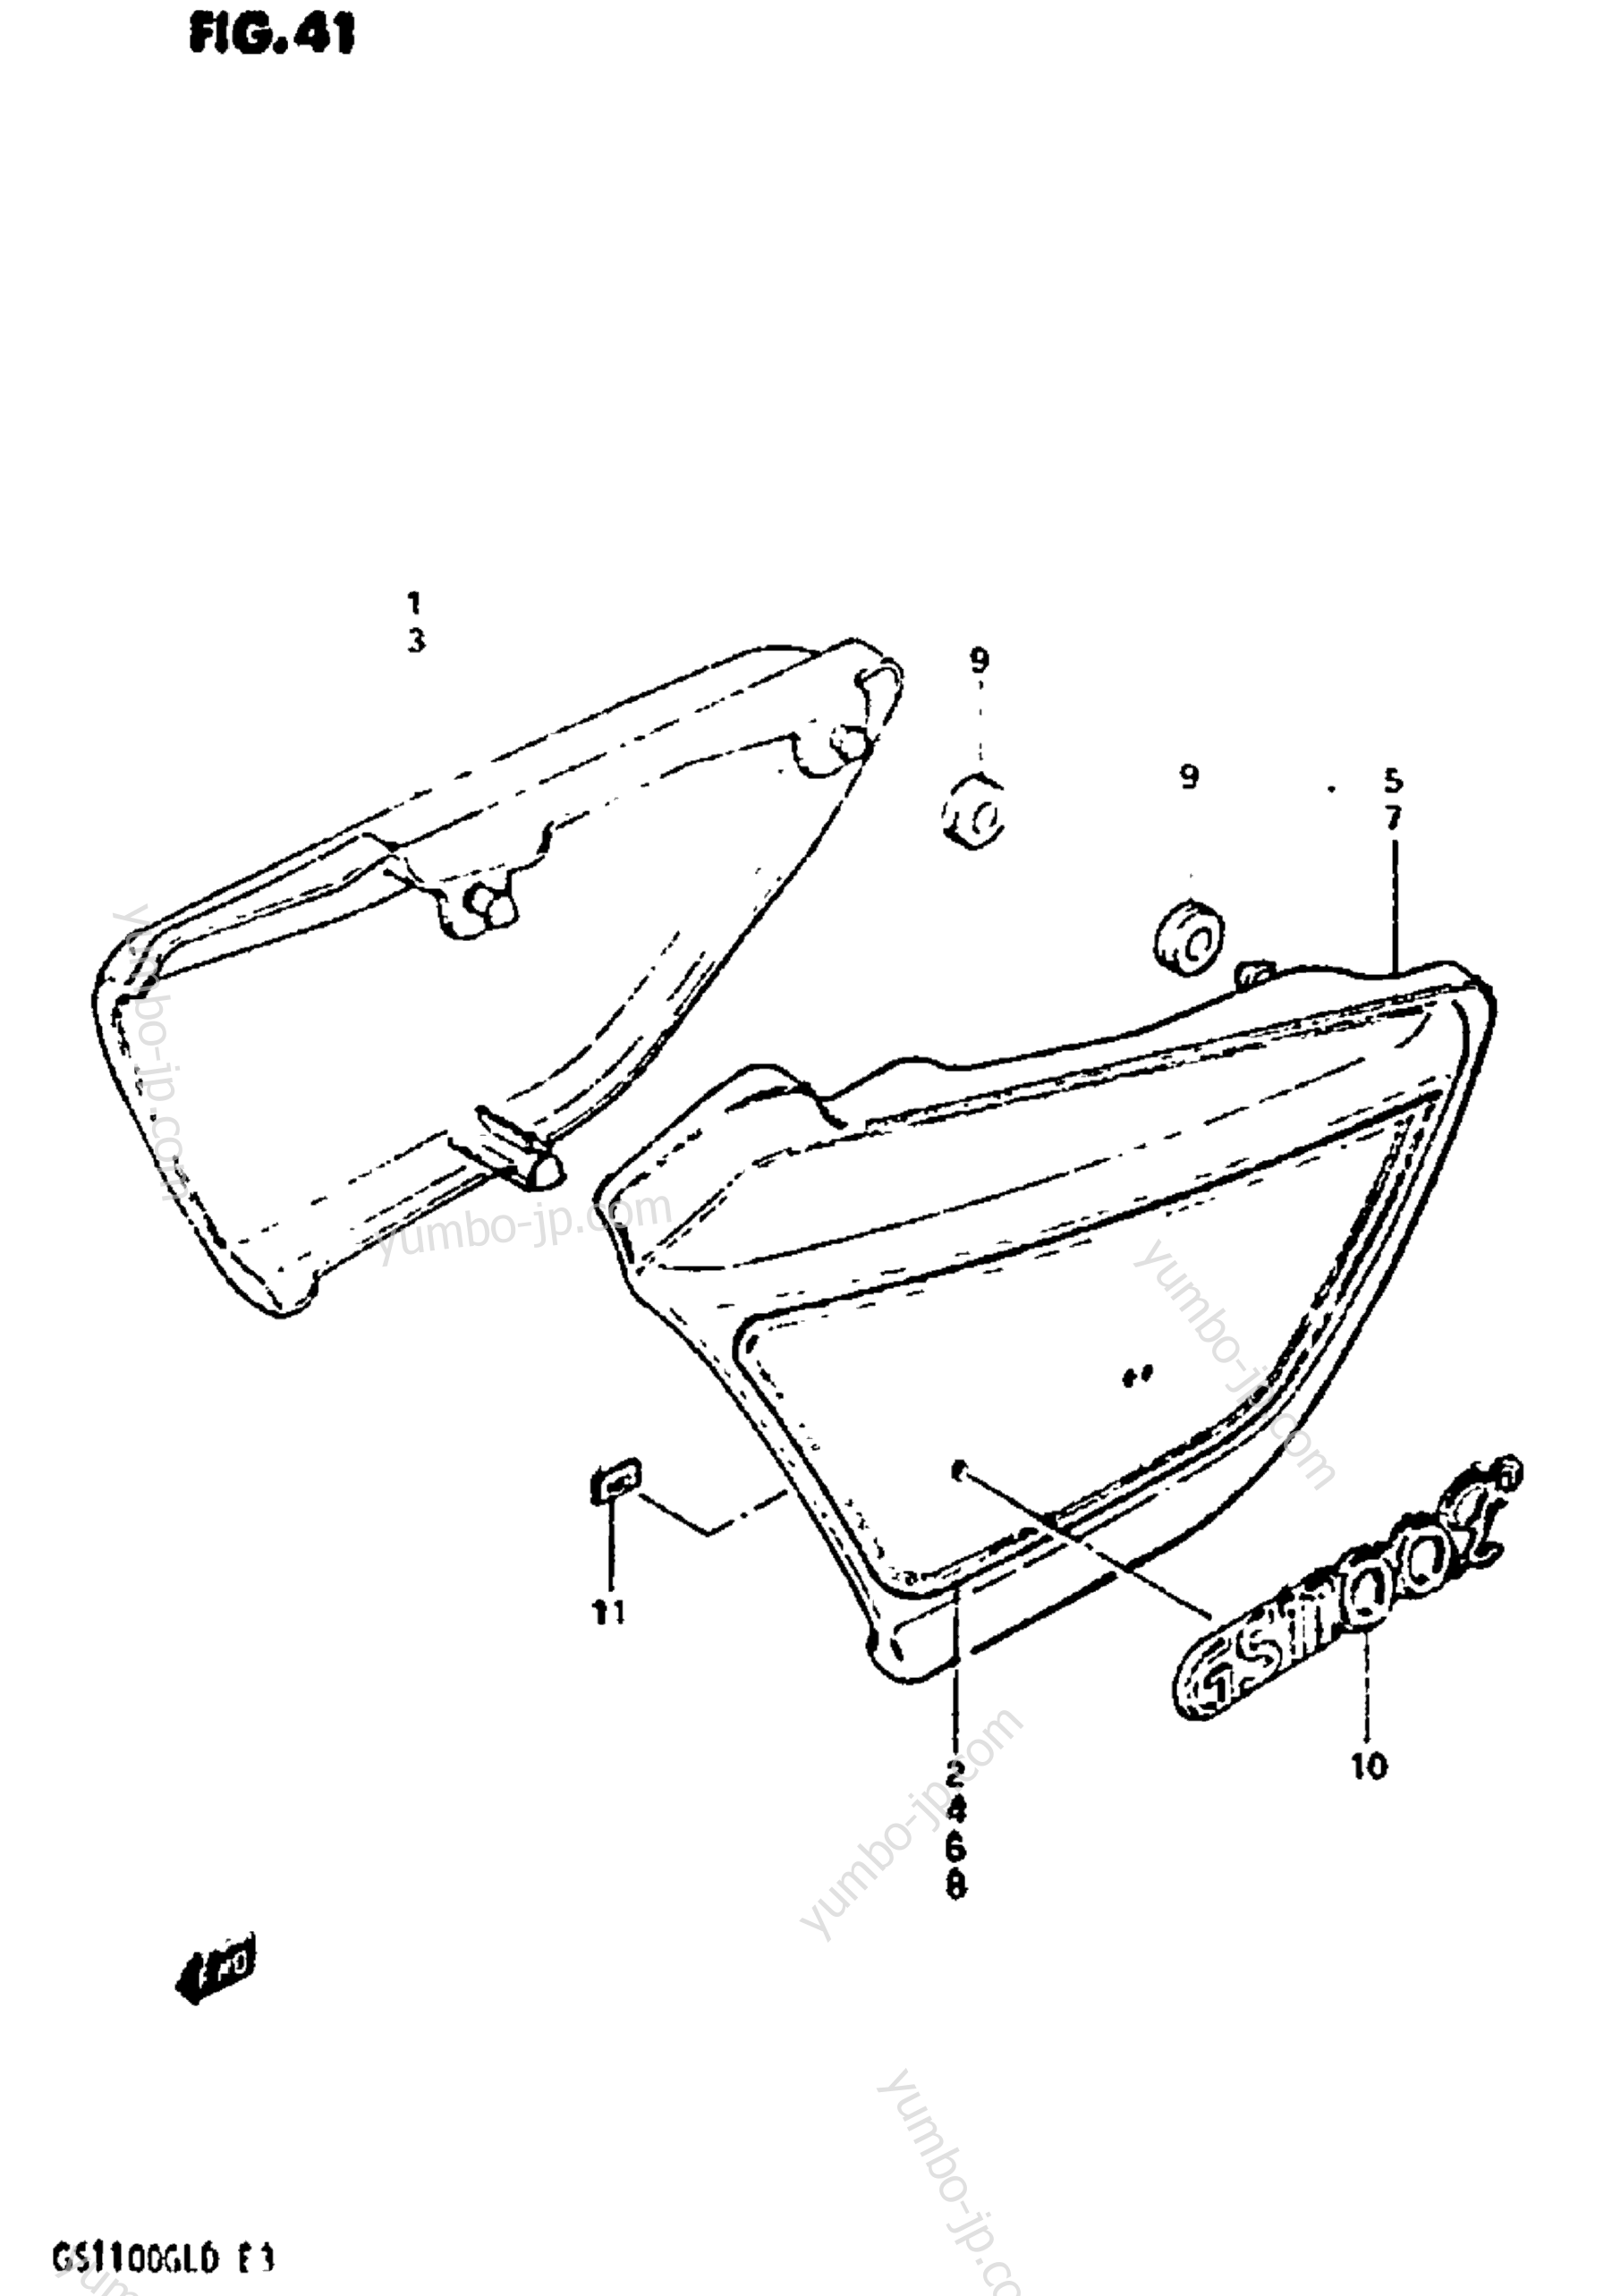 FRAME COVER (MODEL D) for motorcycles SUZUKI GS1100GL 1983 year